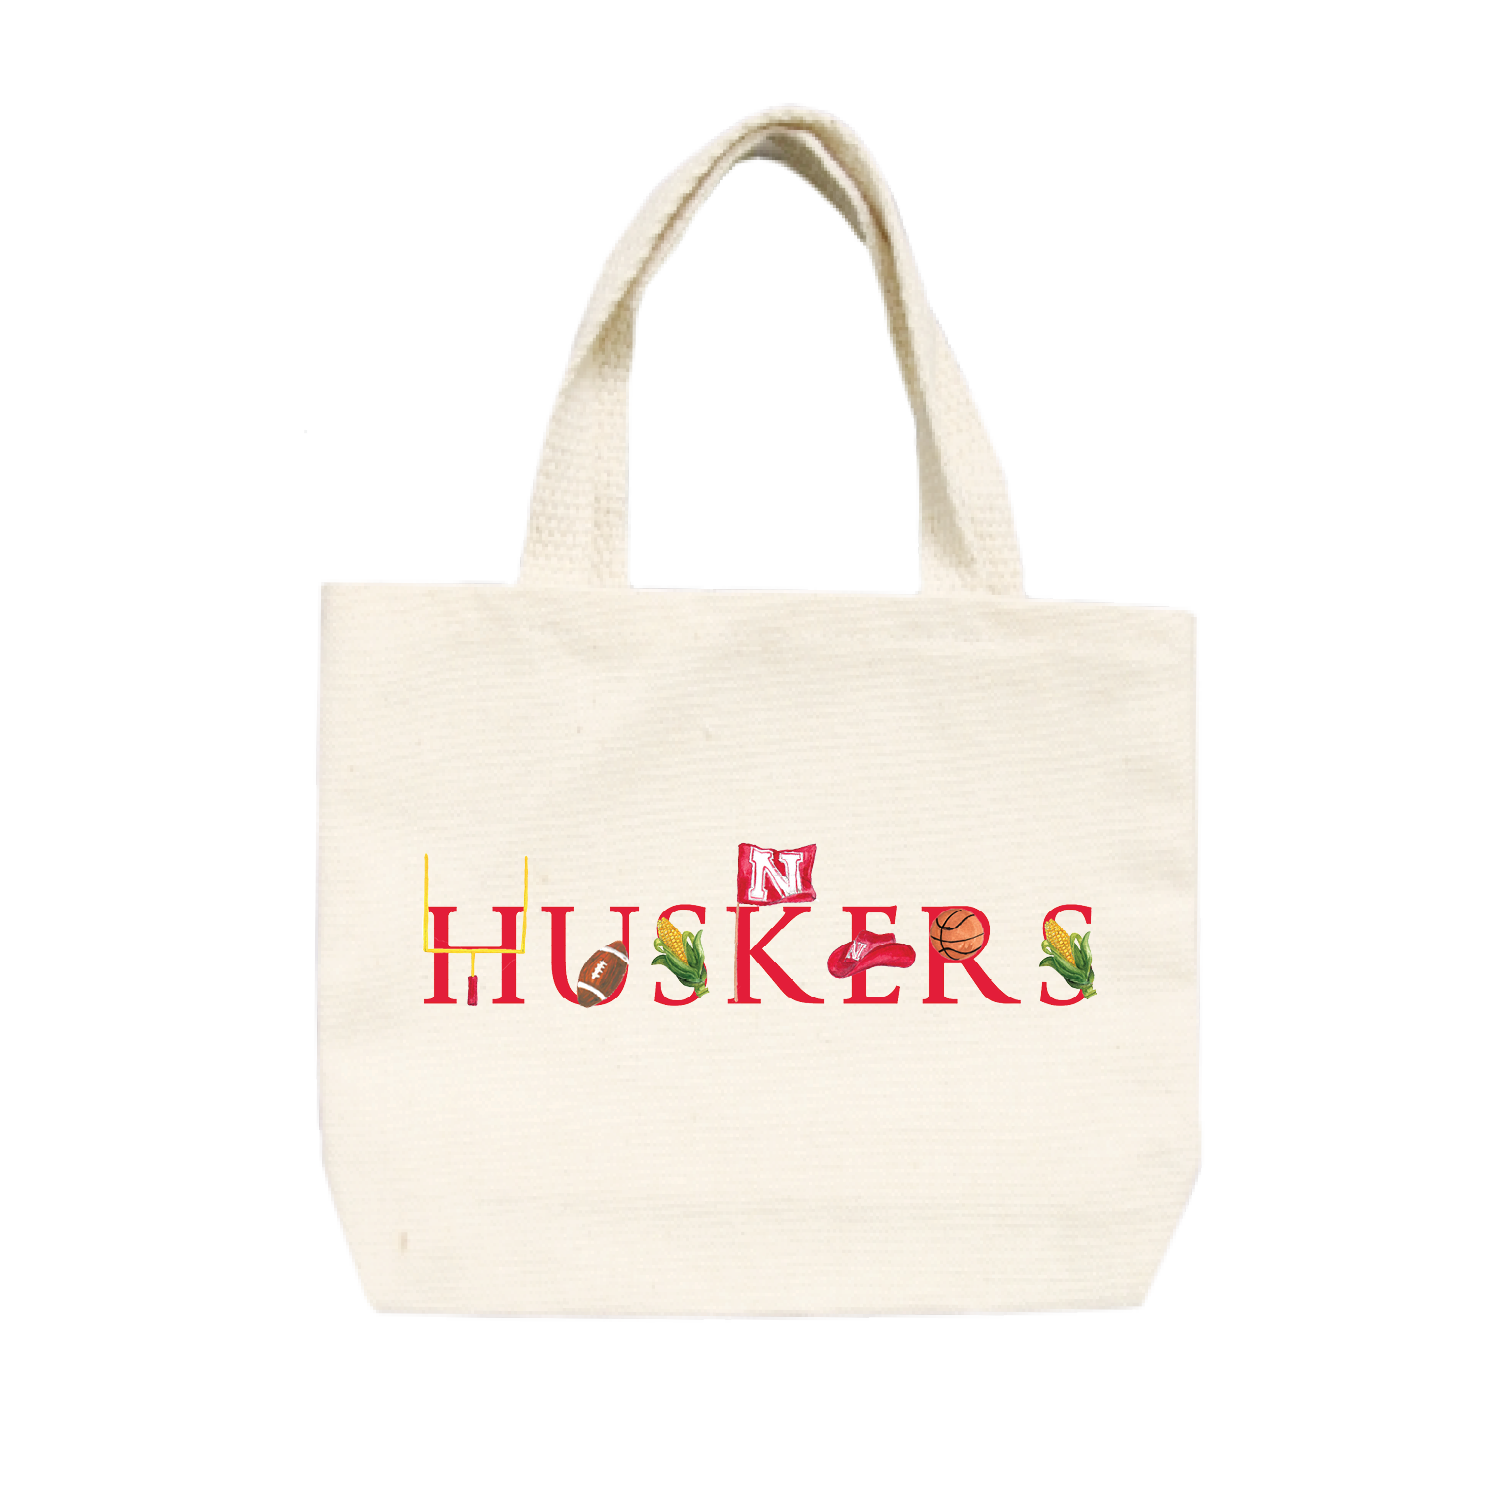 huskers small tote